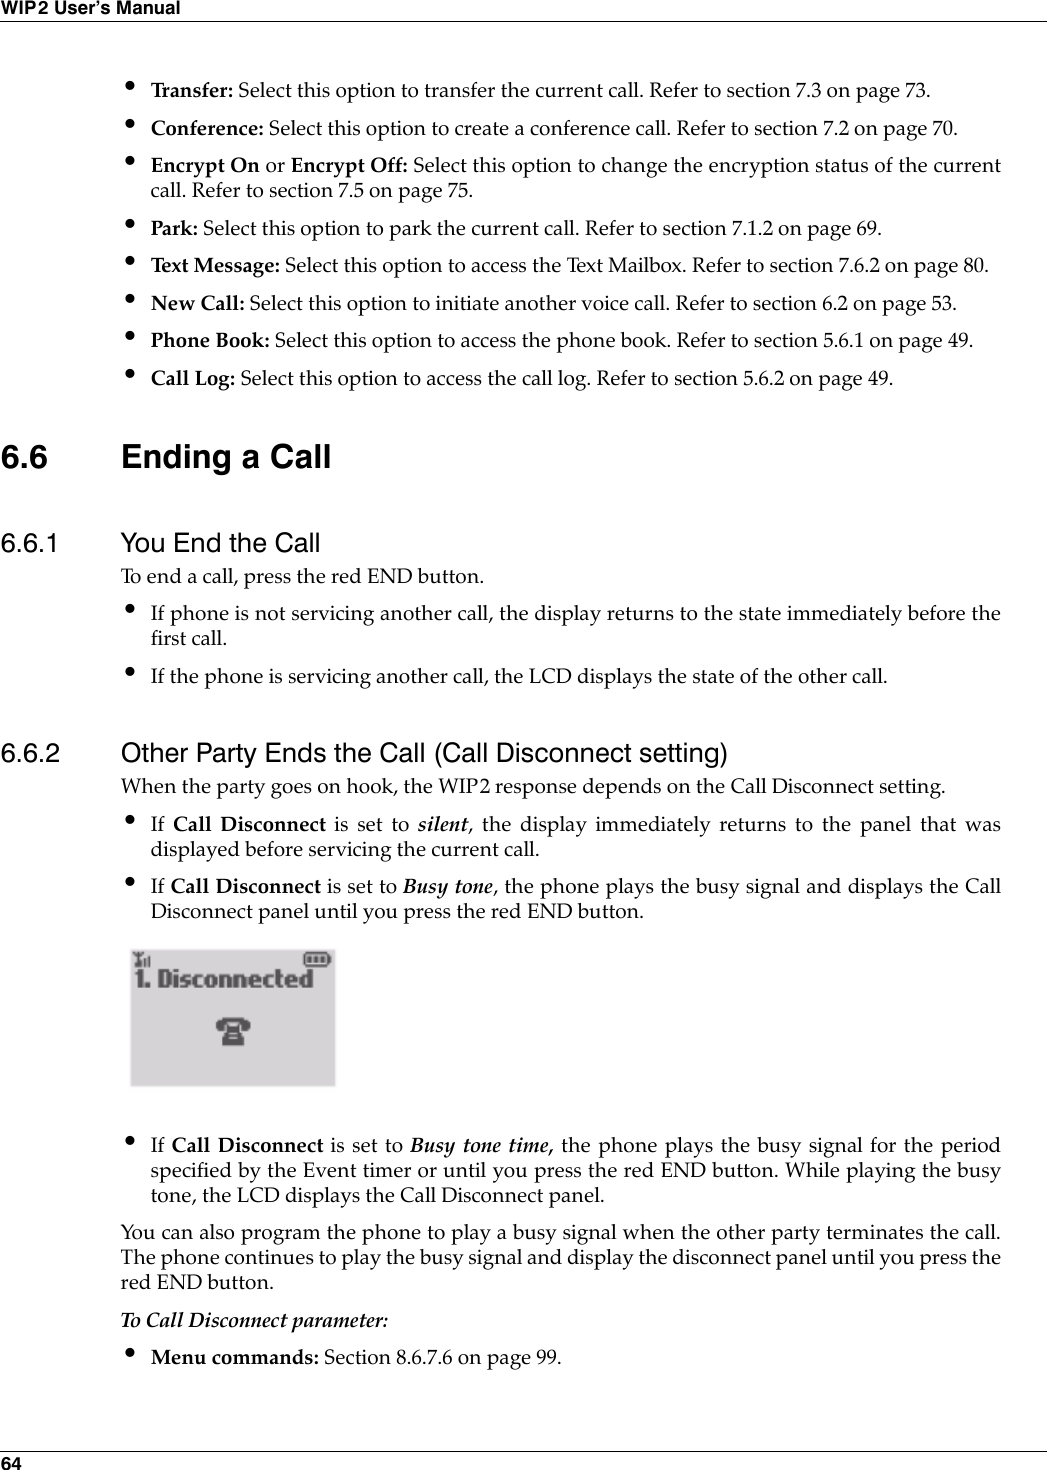 64WIP2 User’s Manual•Tr a n s f e r :  Select this option to transfer the current call. Refer to section 7.3 on page 73.•Conference: Select this option to create a conference call. Refer to section 7.2 on page 70.•Encrypt On or Encrypt Off: Select this option to change the encryption status of the currentcall. Refer to section 7.5 on page 75.•Park: Select this option to park the current call. Refer to section 7.1.2 on page 69.•Text Message: Select this option to access the Text Mailbox. Refer to section 7.6.2 on page 80.•New Call: Select this option to initiate another voice call. Refer to section 6.2 on page 53.•Phone Book: Select this option to access the phone book. Refer to section 5.6.1 on page 49.•Call Log: Select this option to access the call log. Refer to section 5.6.2 on page 49.6.6 Ending a Call6.6.1 You End the CallTo end a call, press the red END button.•If phone is not servicing another call, the display returns to the state immediately before thefirst call.•If the phone is servicing another call, the LCD displays the state of the other call.6.6.2 Other Party Ends the Call (Call Disconnect setting)When the party goes on hook, the WIP2 response depends on the Call Disconnect setting.•If  Call Disconnect is set to silent, the display immediately returns to the panel that wasdisplayed before servicing the current call.•If Call Disconnect is set to Busy tone, the phone plays the busy signal and displays the CallDisconnect panel until you press the red END button.•If Call Disconnect is set to Busy tone time, the phone plays the busy signal for the periodspecified by the Event timer or until you press the red END button. While playing the busytone, the LCD displays the Call Disconnect panel.You can also program the phone to play a busy signal when the other party terminates the call.The phone continues to play the busy signal and display the disconnect panel until you press thered END button. To C al l Di sc on ne ct p ar am et er :•Menu commands: Section 8.6.7.6 on page 99.